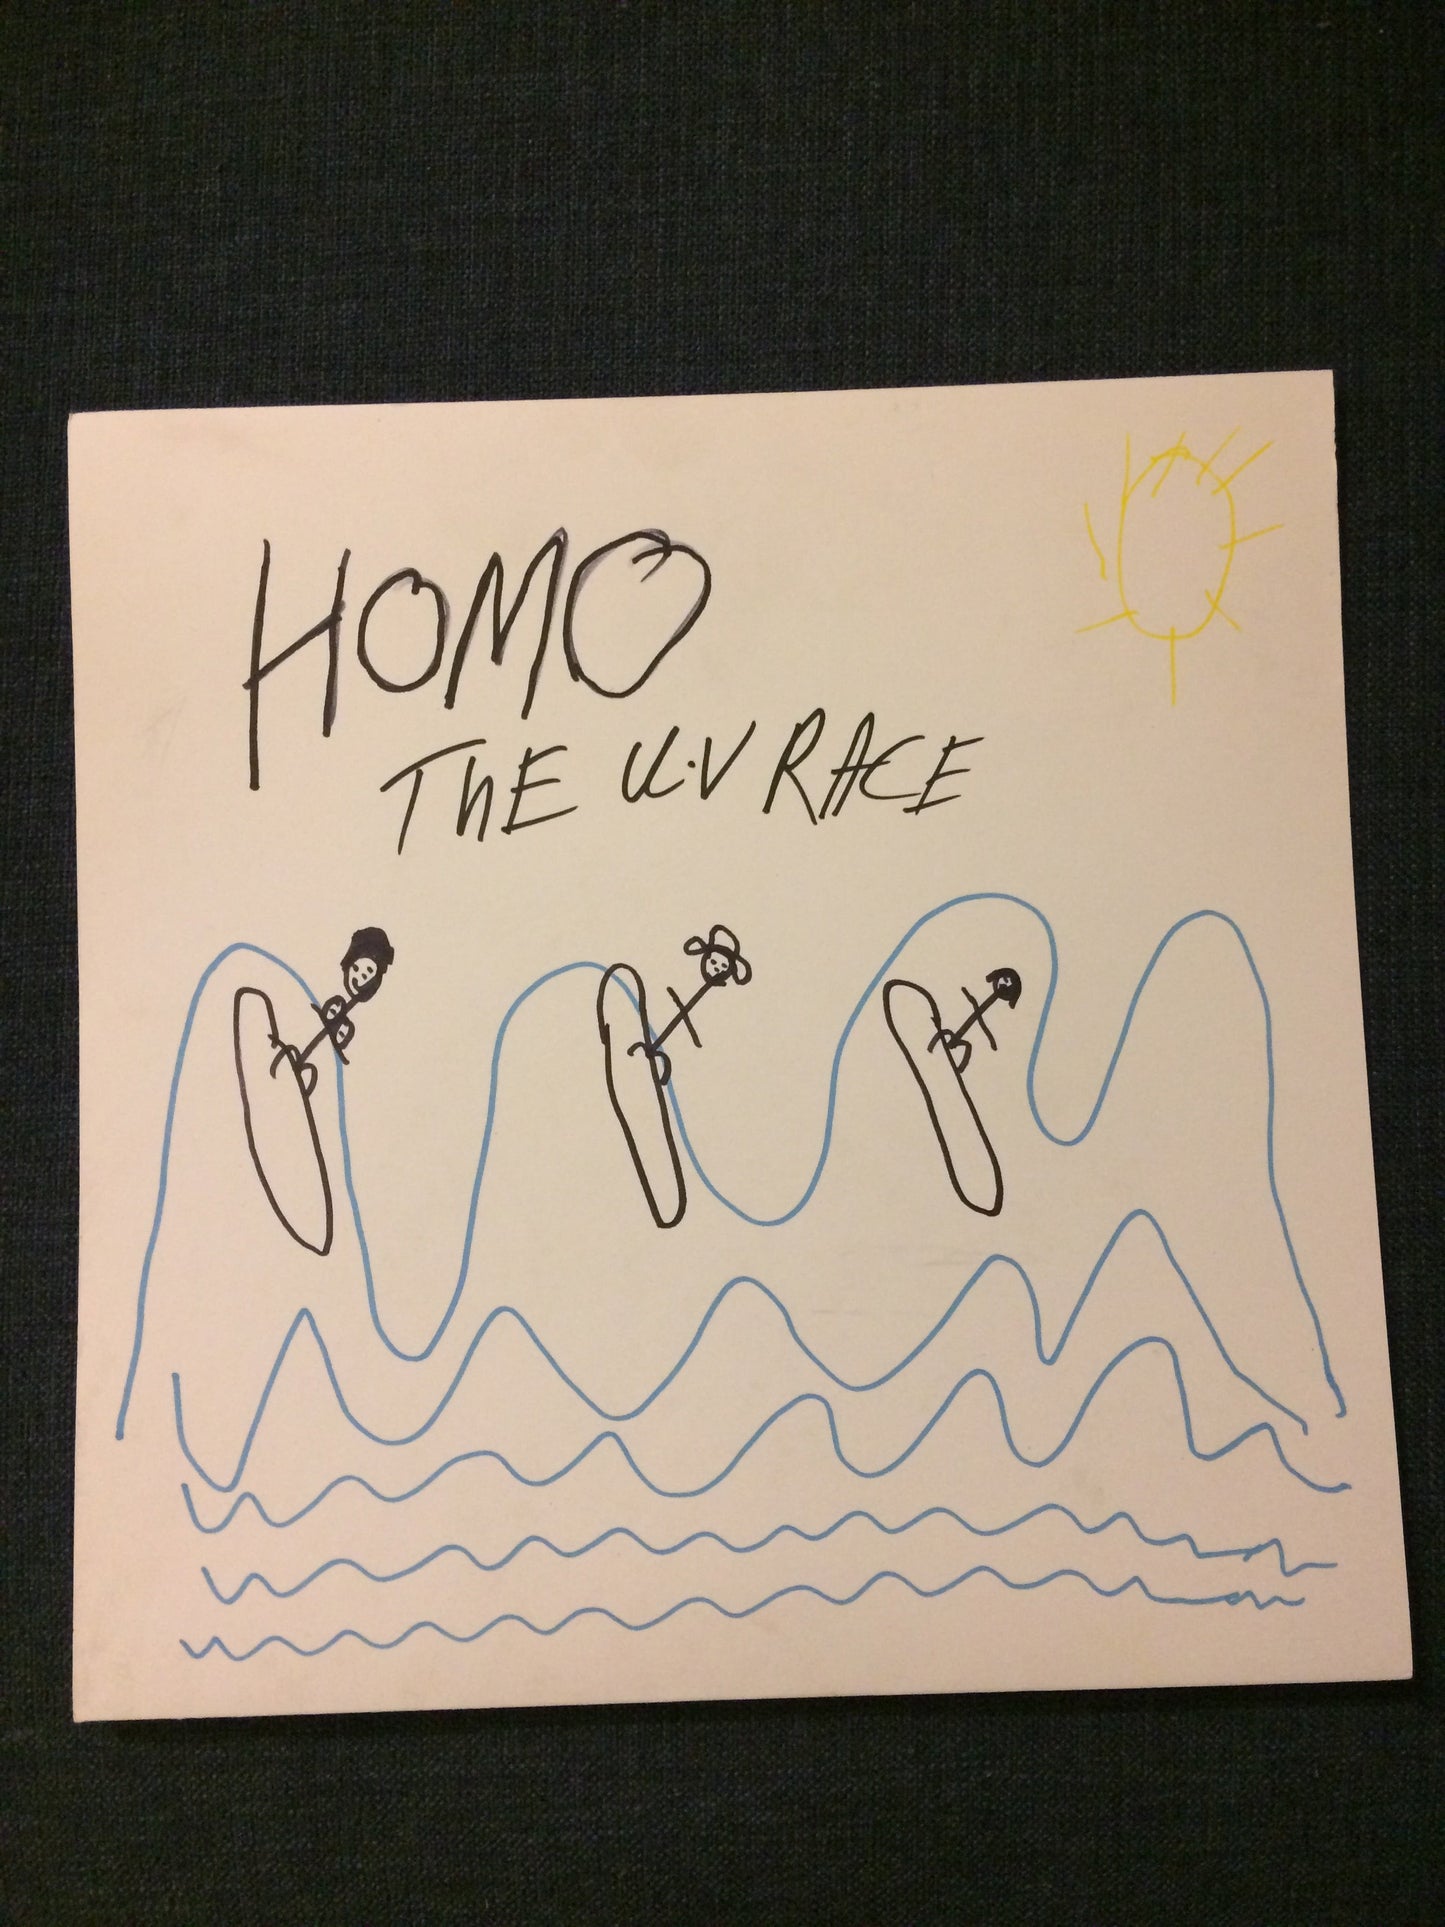 THE UV RACE - "HOMO" LP *LIMITED EDITION COVER*